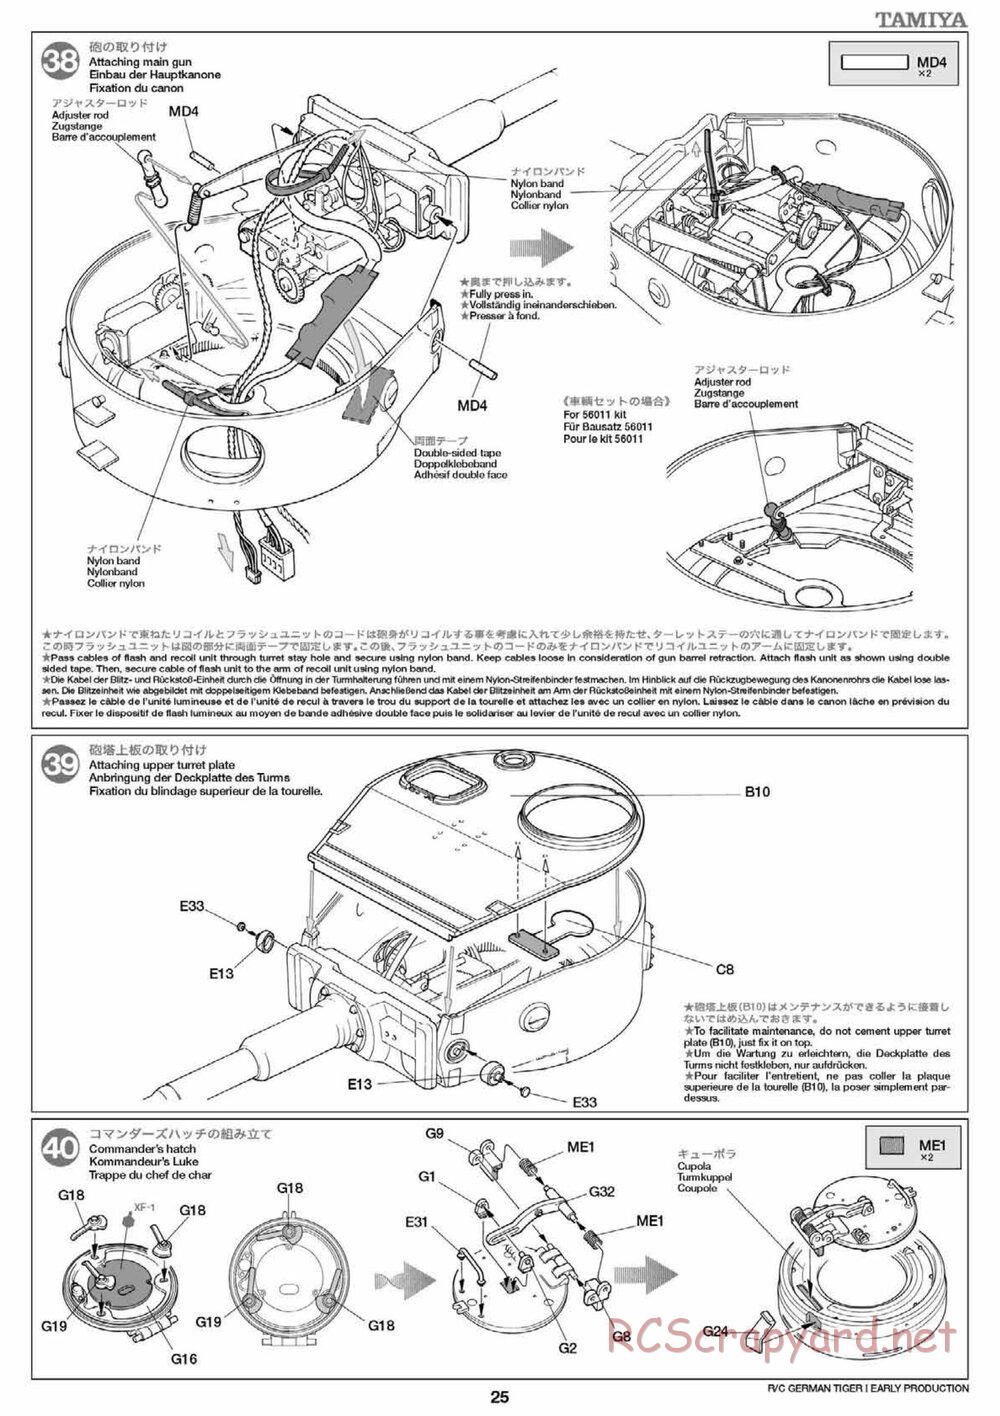 Tamiya - Tiger I Early Production - 1/16 Scale Chassis - Manual - Page 25